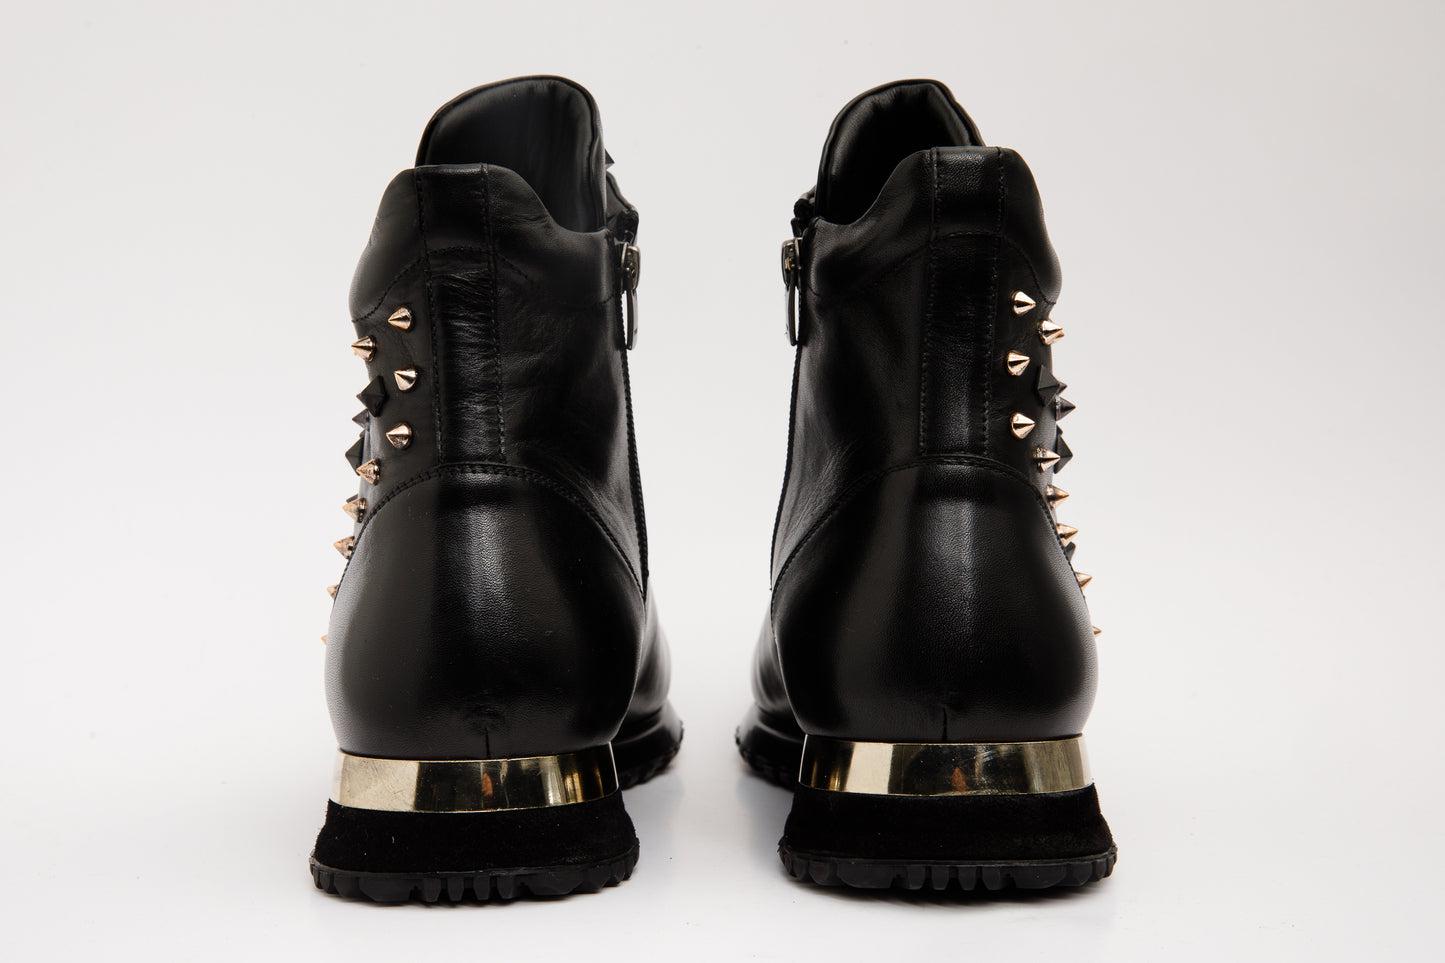 The Infanta High-Top Black Spike Leather Men Sneaker Limited Edition